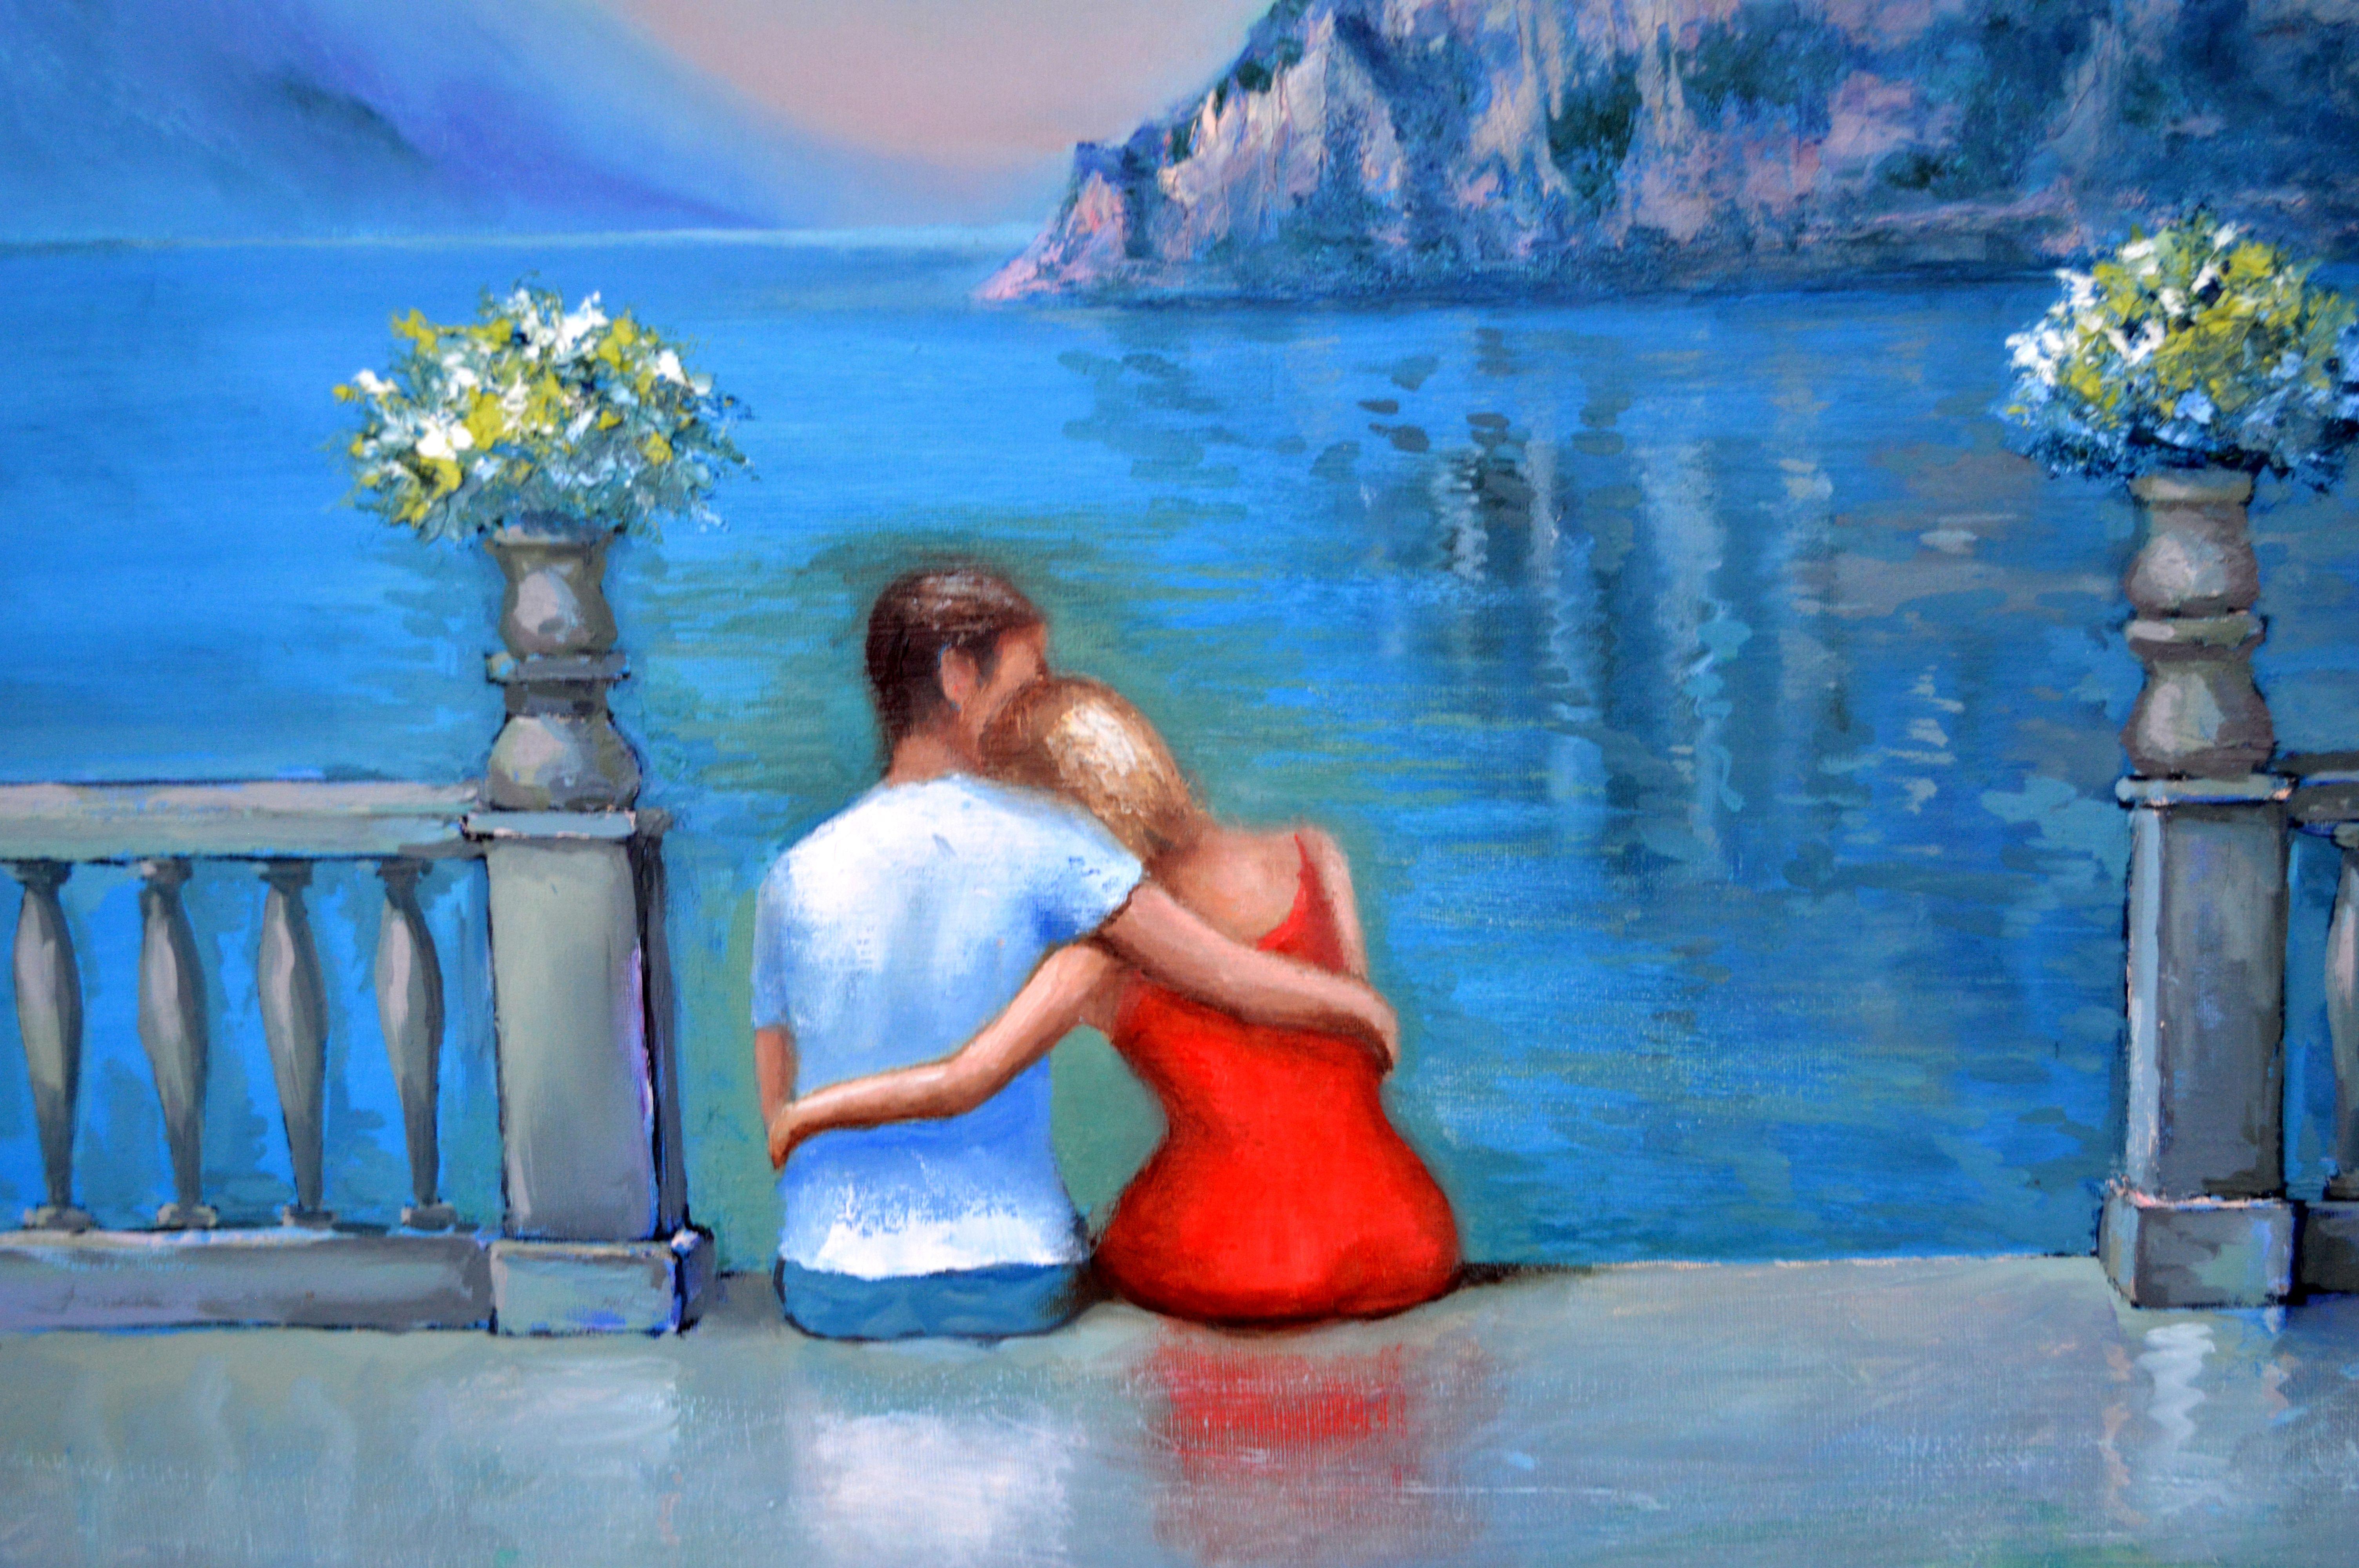 In this oil painting, I've poured my soul into capturing the intimacy of a serene moment shared between two people. The surreal backdrop, blending the majestic beauty of nature with a touch of the ethereal, invites you into a world where love is as